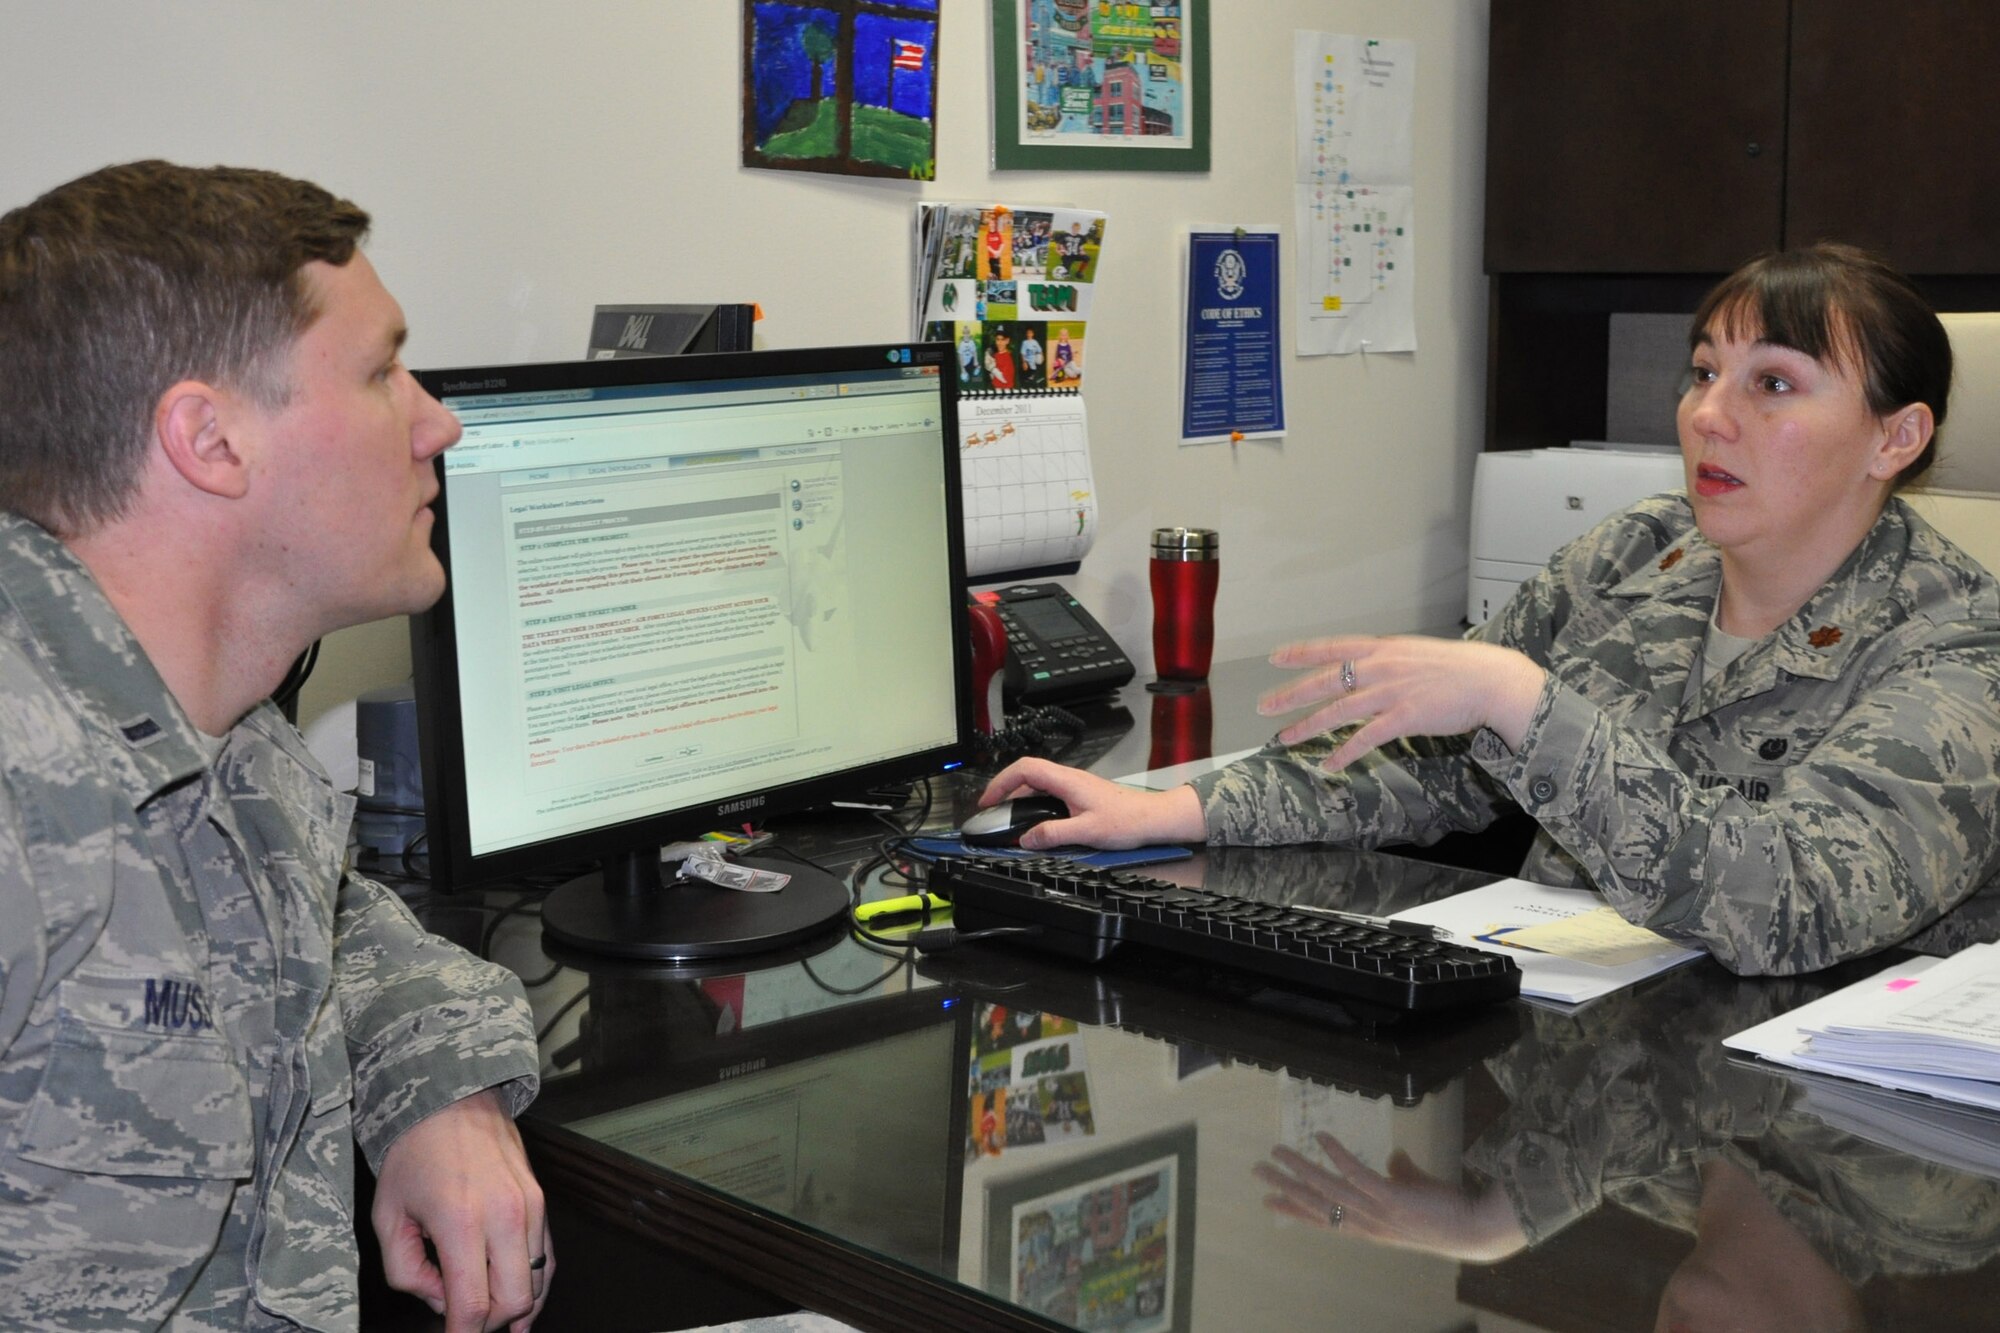 Air Force Maj. Vicki A. Belleau (right), a Staff Judge Advocate assigned to the
910th Airlift Wing, shows the Air Force Legal Assistance website to 1st Lt.
Jeffrey G. Mussman, an Individual Mobilization Augmentee assistant judge
advocate, at her office here, Jan. 31, 2012. The 910th Staff Judge Advocate  serves both YARS and the 911th Airlift Wing at Pittsburgh IAP Air Reserve
Station, Pa. providing legal advice regarding environmental, labor and
employment and contract law.    The office also provides various other legal
advice and assistance in coordination with the 910th Judge Advocate General
office. The site they are viewing, https://aflegalassistance.law.af.mil, is intended for active duty, reserve component, retired military members, their family members, and others eligible for legal assistance through the Air Force.   
